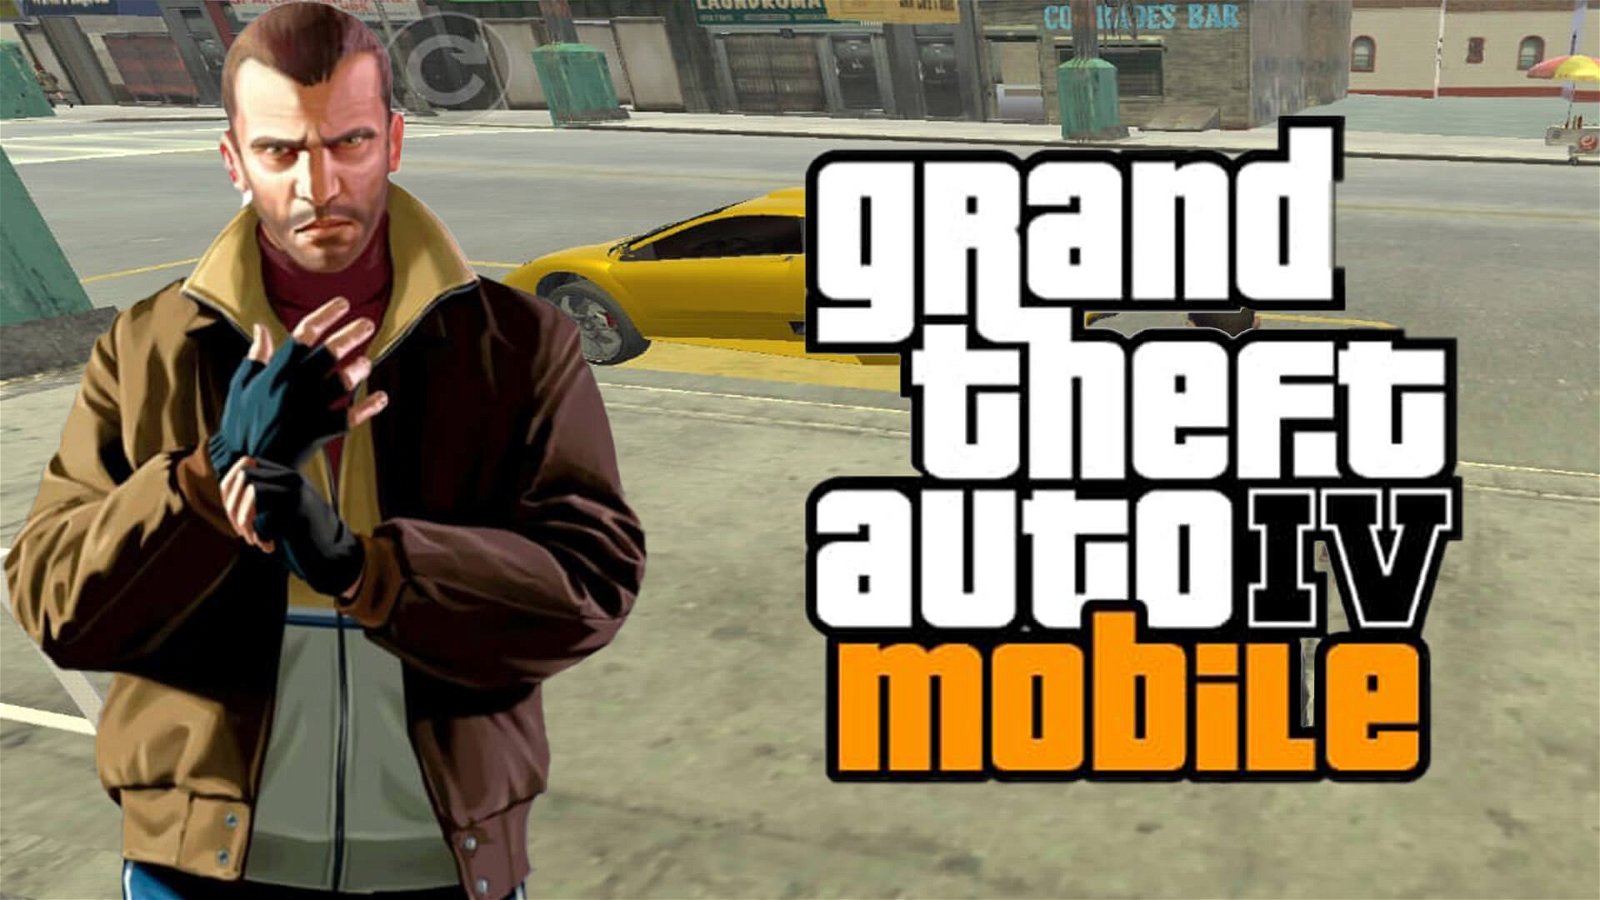 GTA 4 APK Download for Android: All you need to know